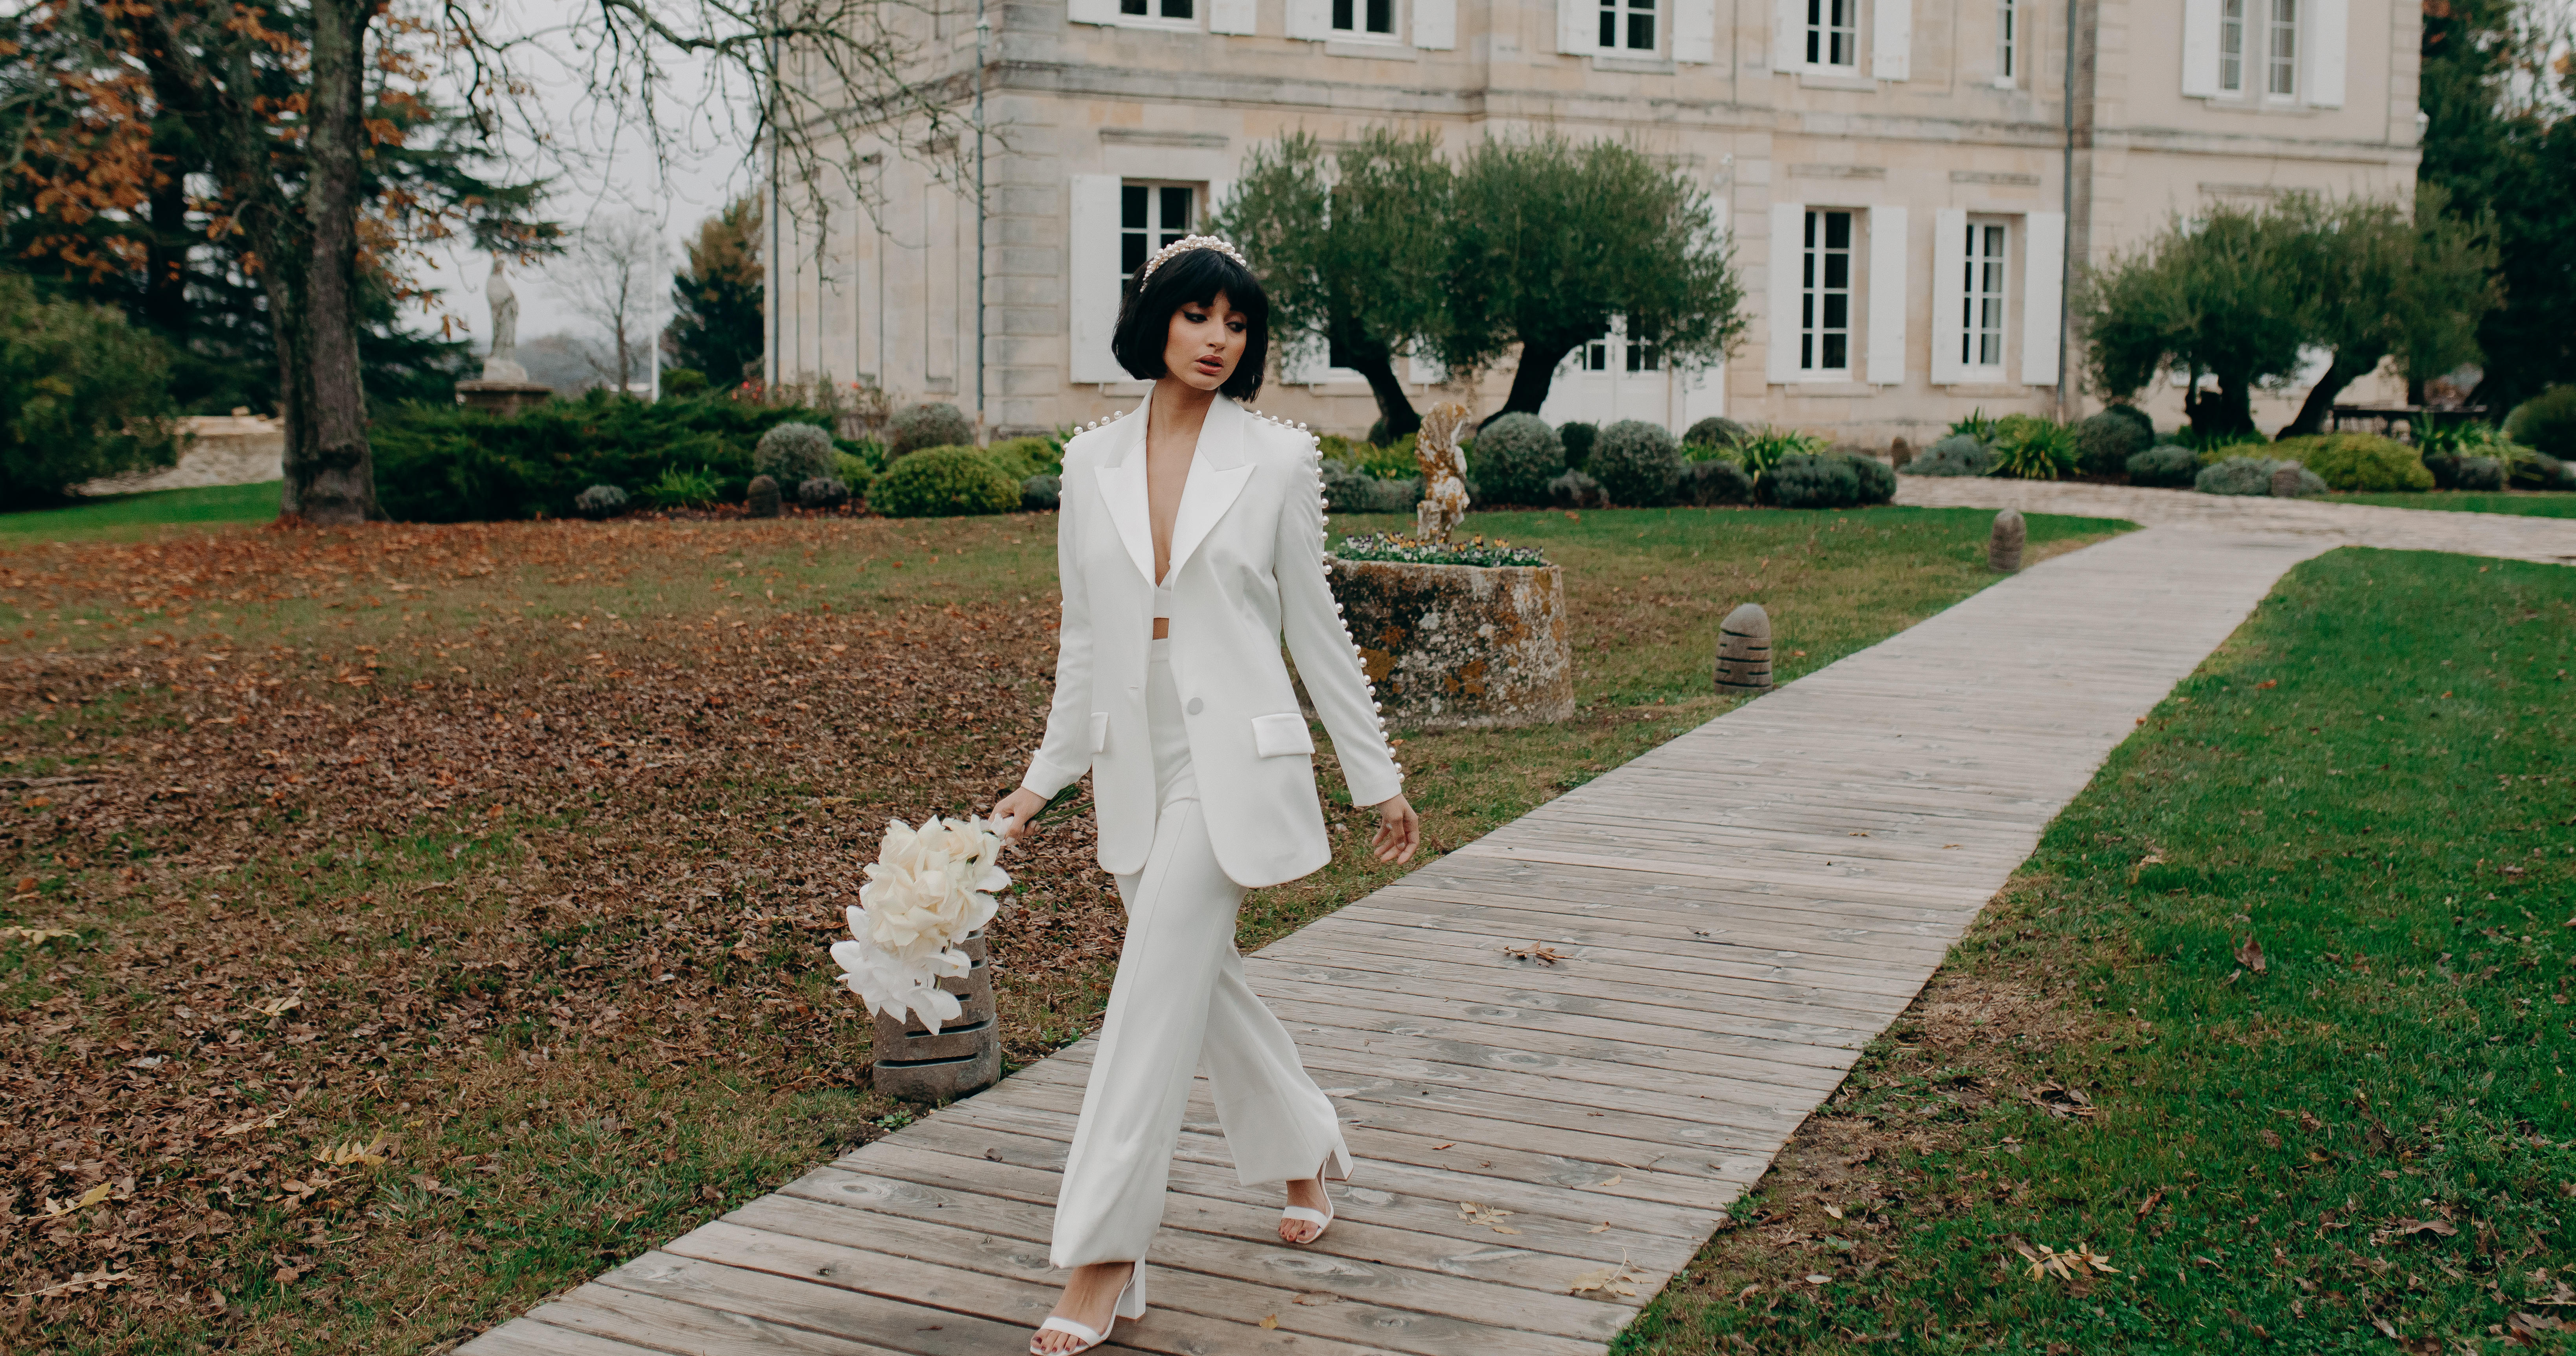 Breathtaking Wedding Editorial in the South of